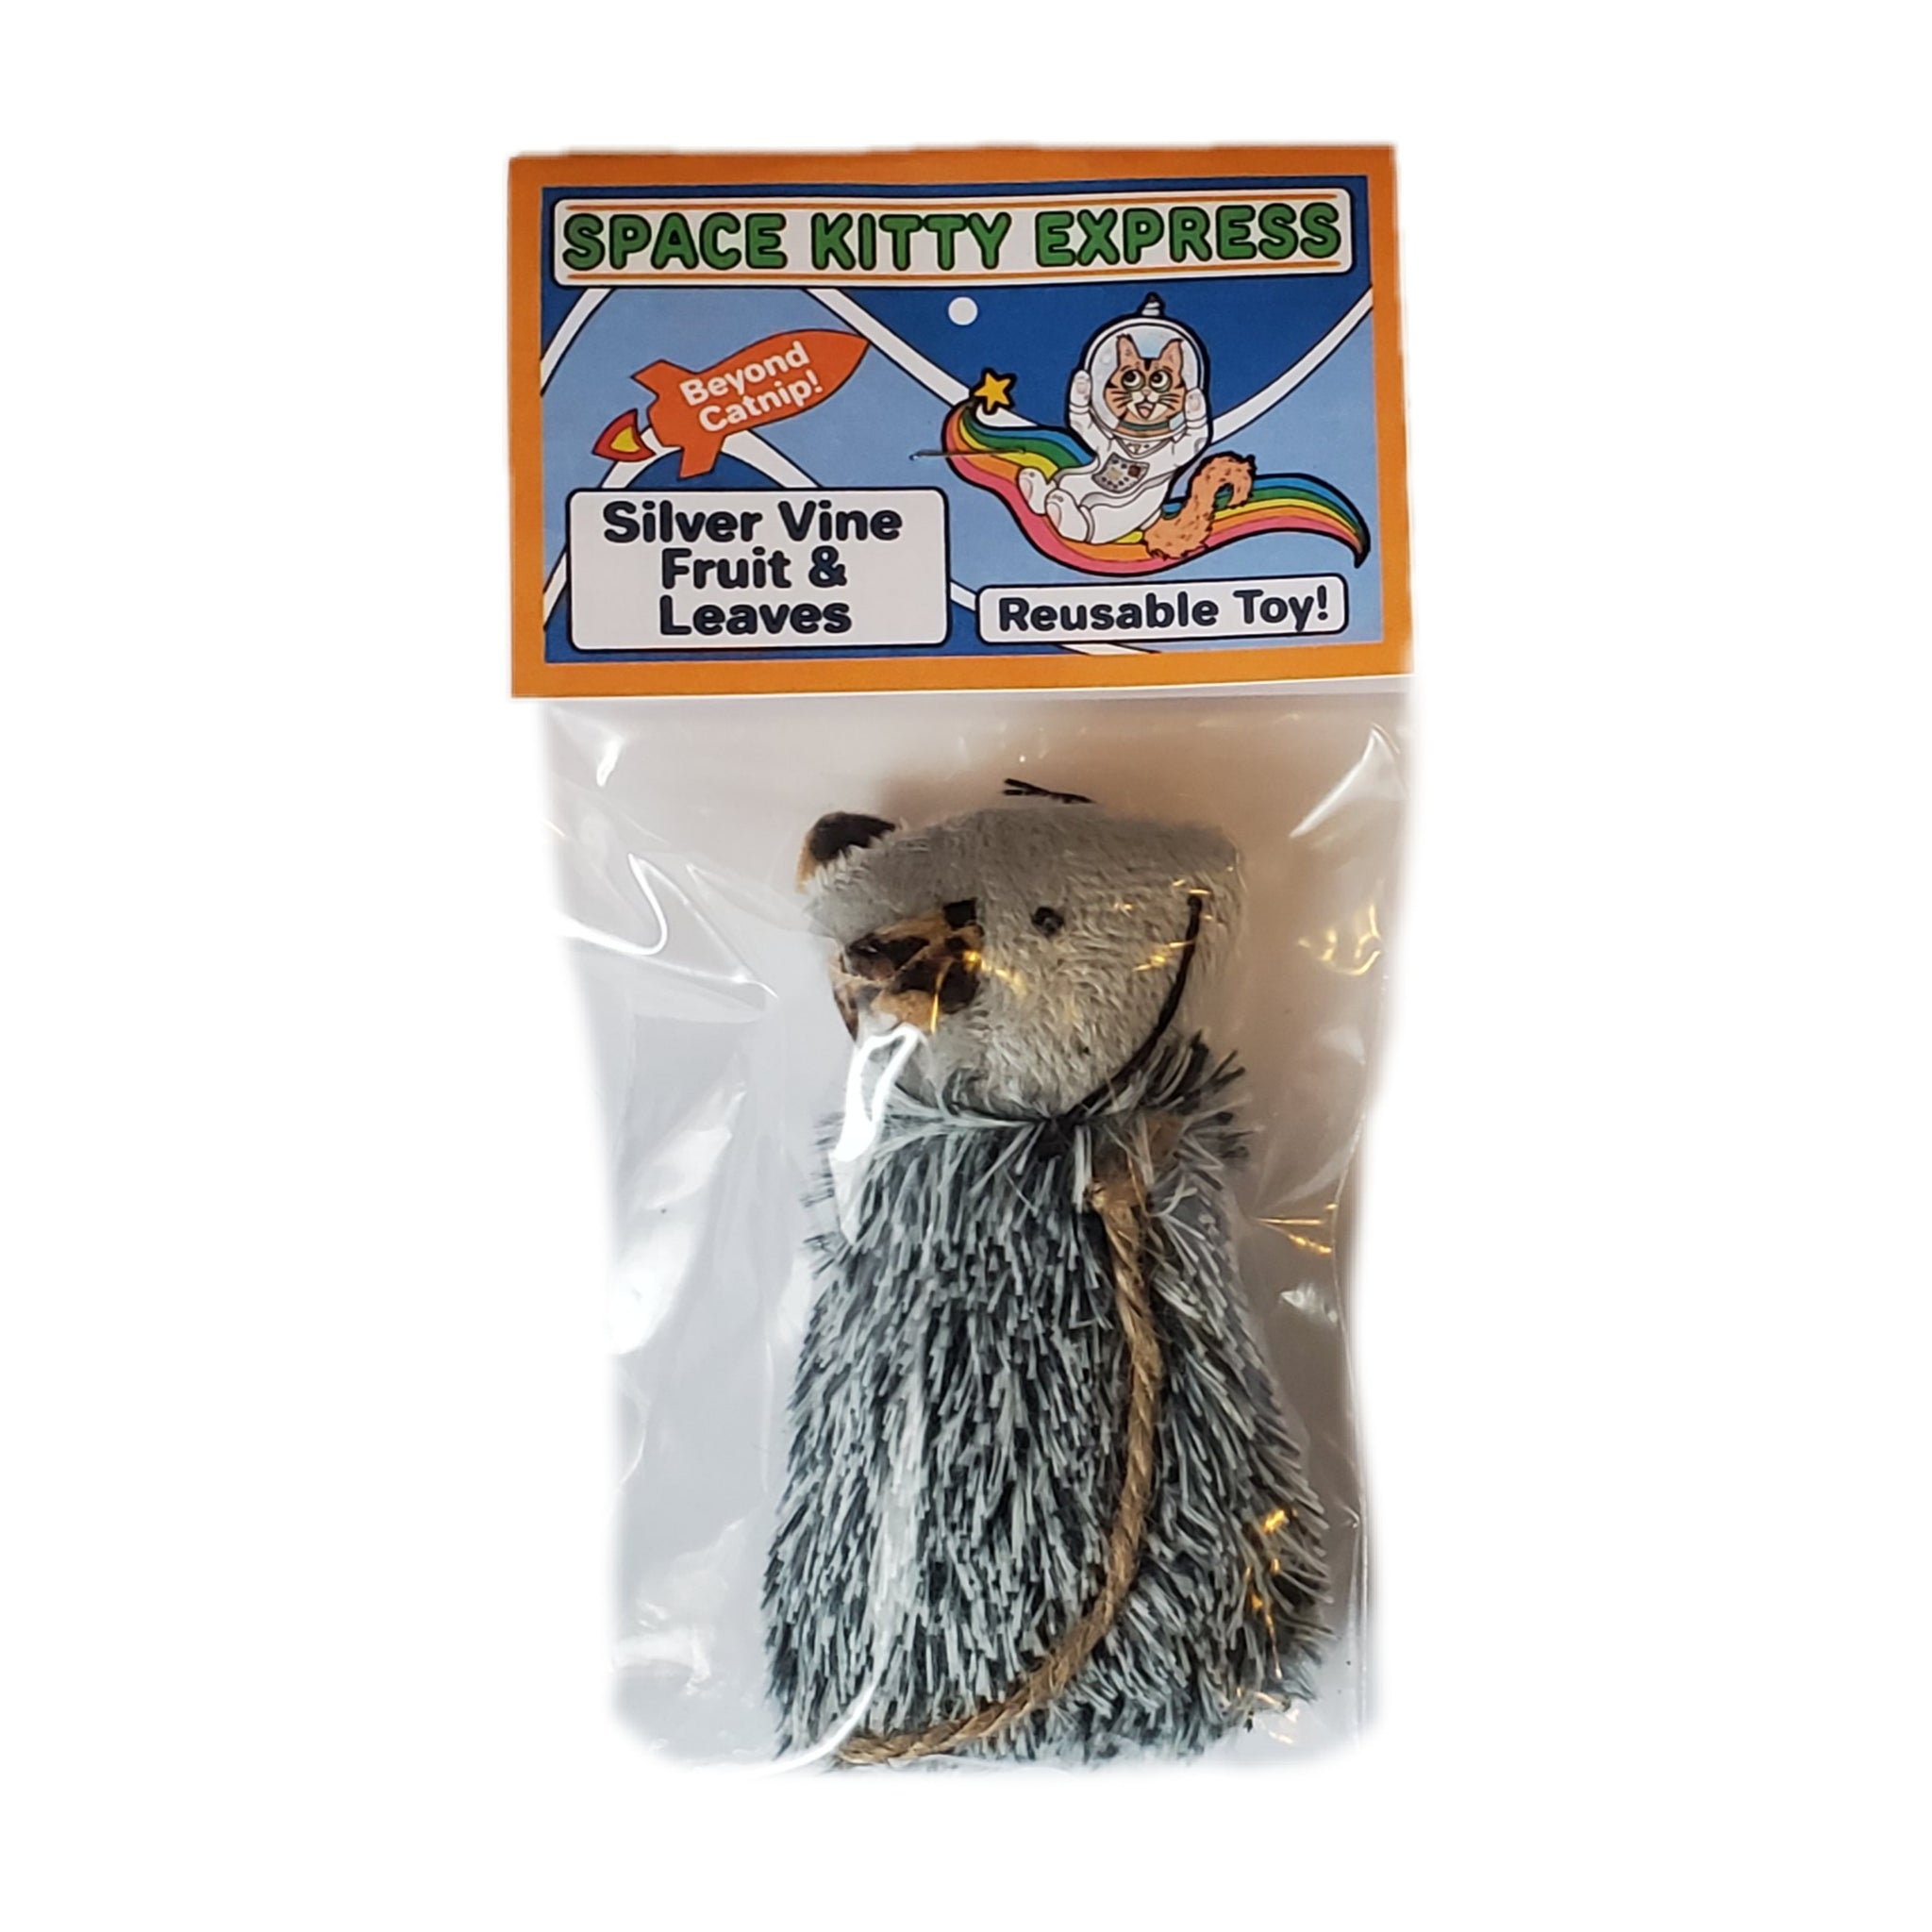 Space Kitty Express cat toy filled with Silver Vine Fruit & Leaves, front of package